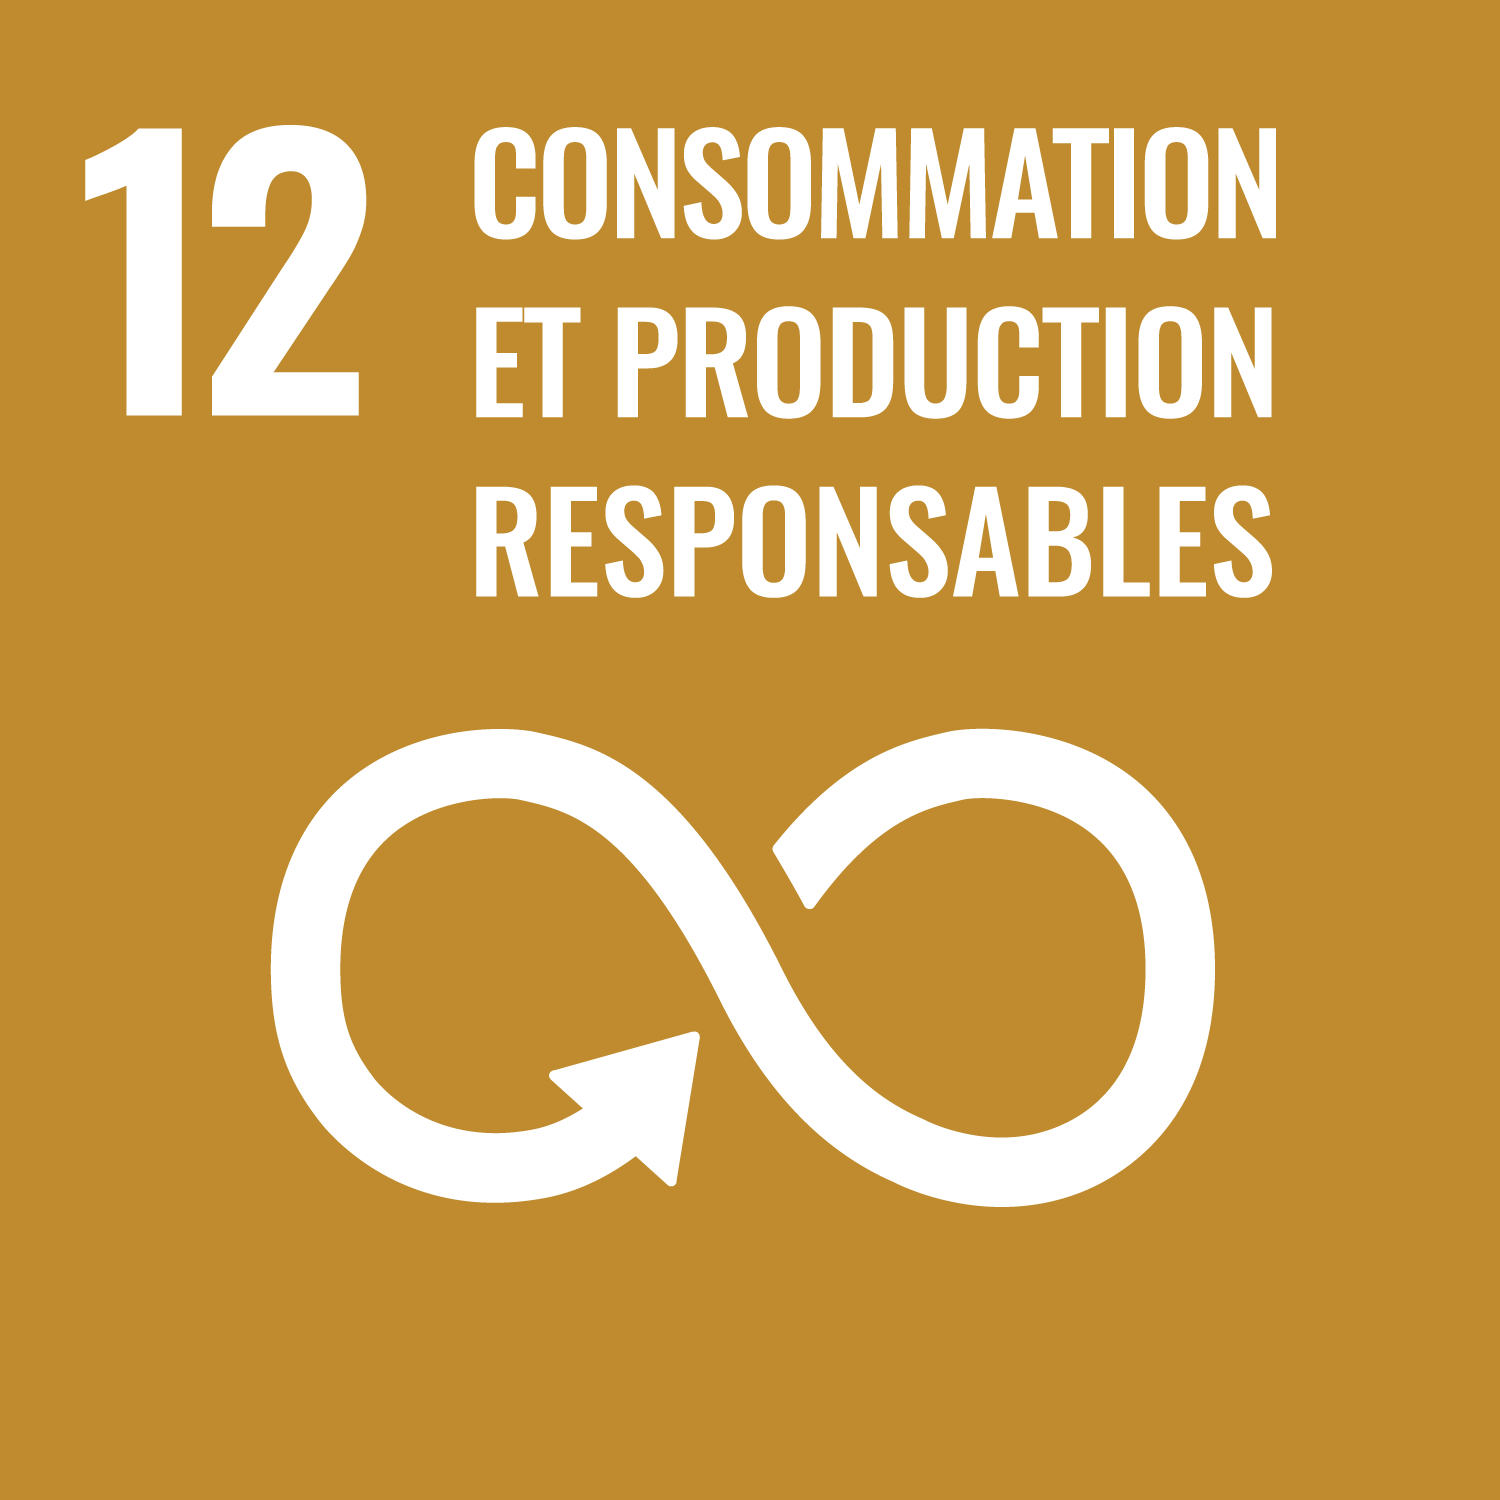 12 - RESPONSIBLE CONSUMPTION AND PRODUCTION